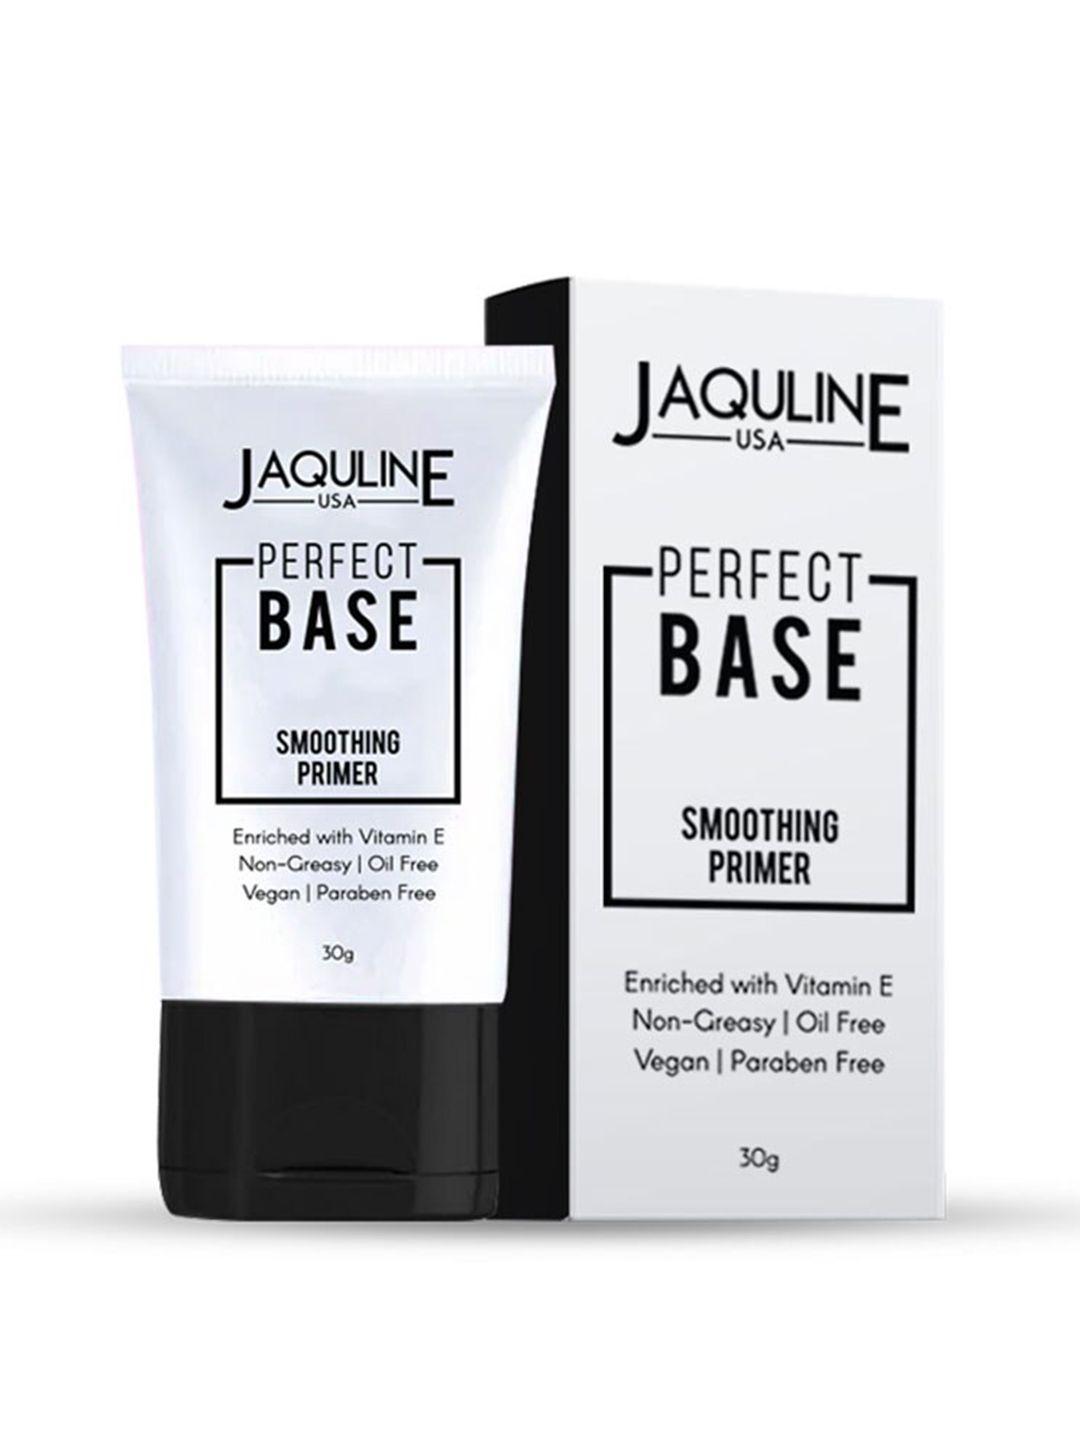 jaquline usa perfect base smoothing primer with vitamin e - 30 g